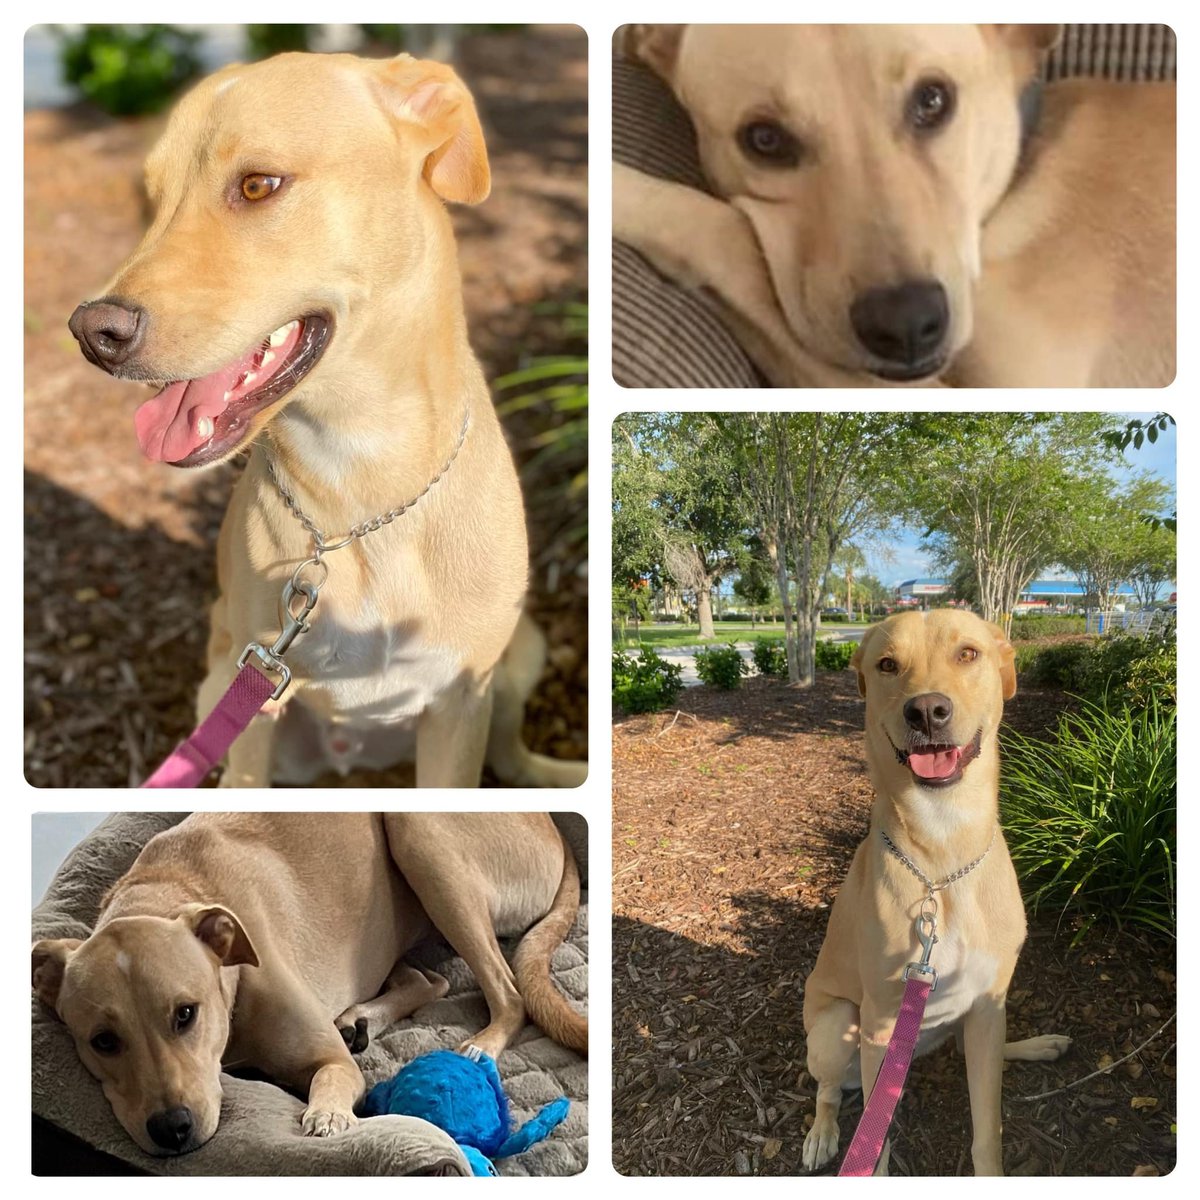 NATALIE FOSTERS: Cheesecake

• 2 yr male, fixed
• Good with dogs close to his size (65 lbs), no cats
• Has a disfigured foot that doesn’t slow him down one bit!
• Prefer a home with a large/fenced yard for him to run and play

Text Natalie: 813-966-6618 - Located in SWFL